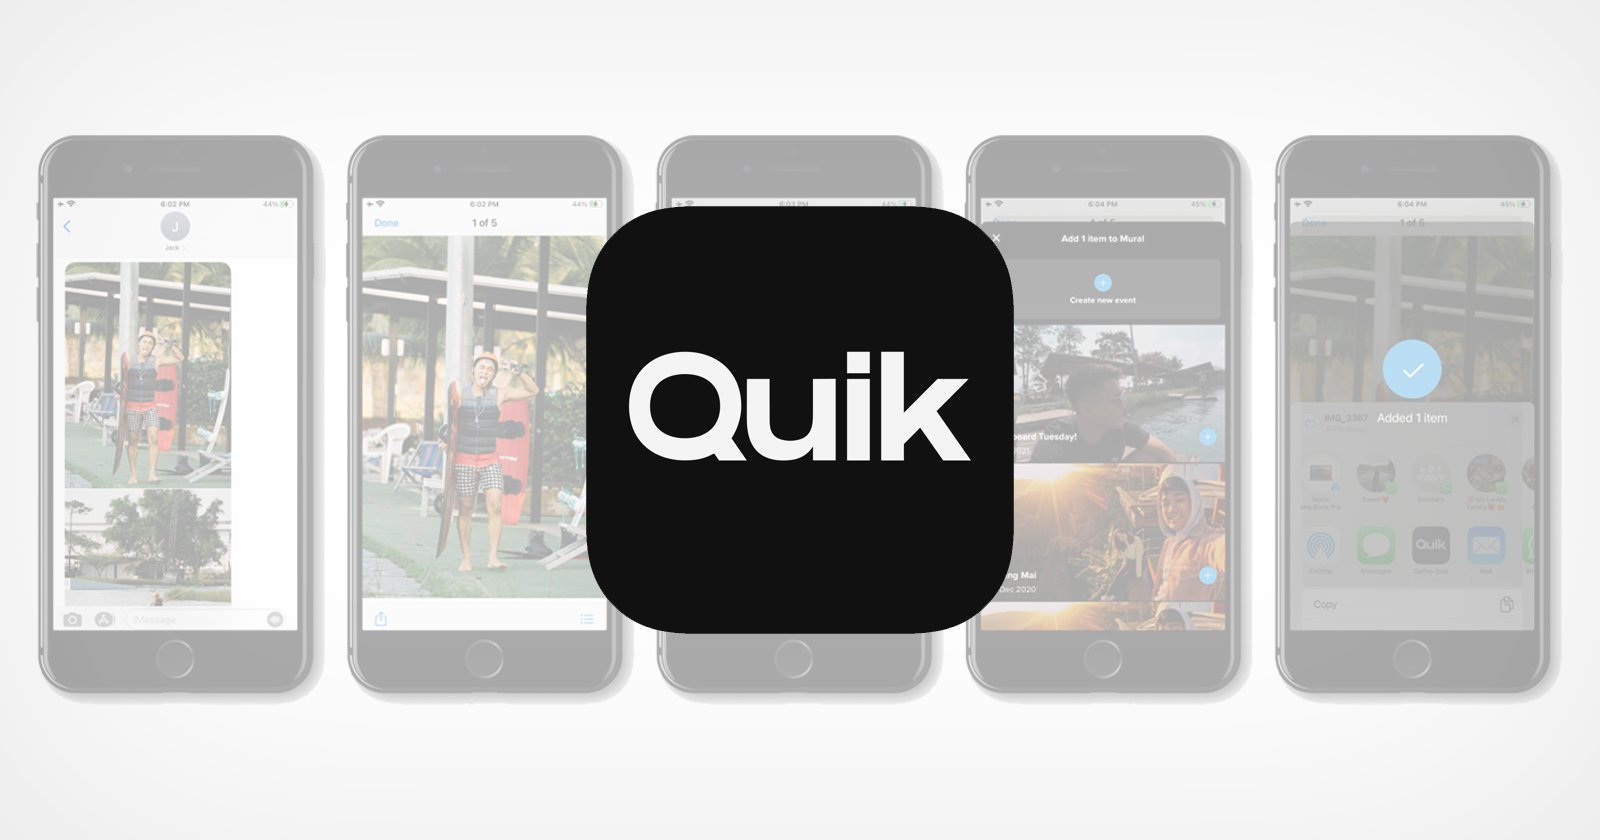 GoPros-Quik-App-Now-Offers-Unlimited-Cloud-Storage-at-No-Extra-Cost.jpg